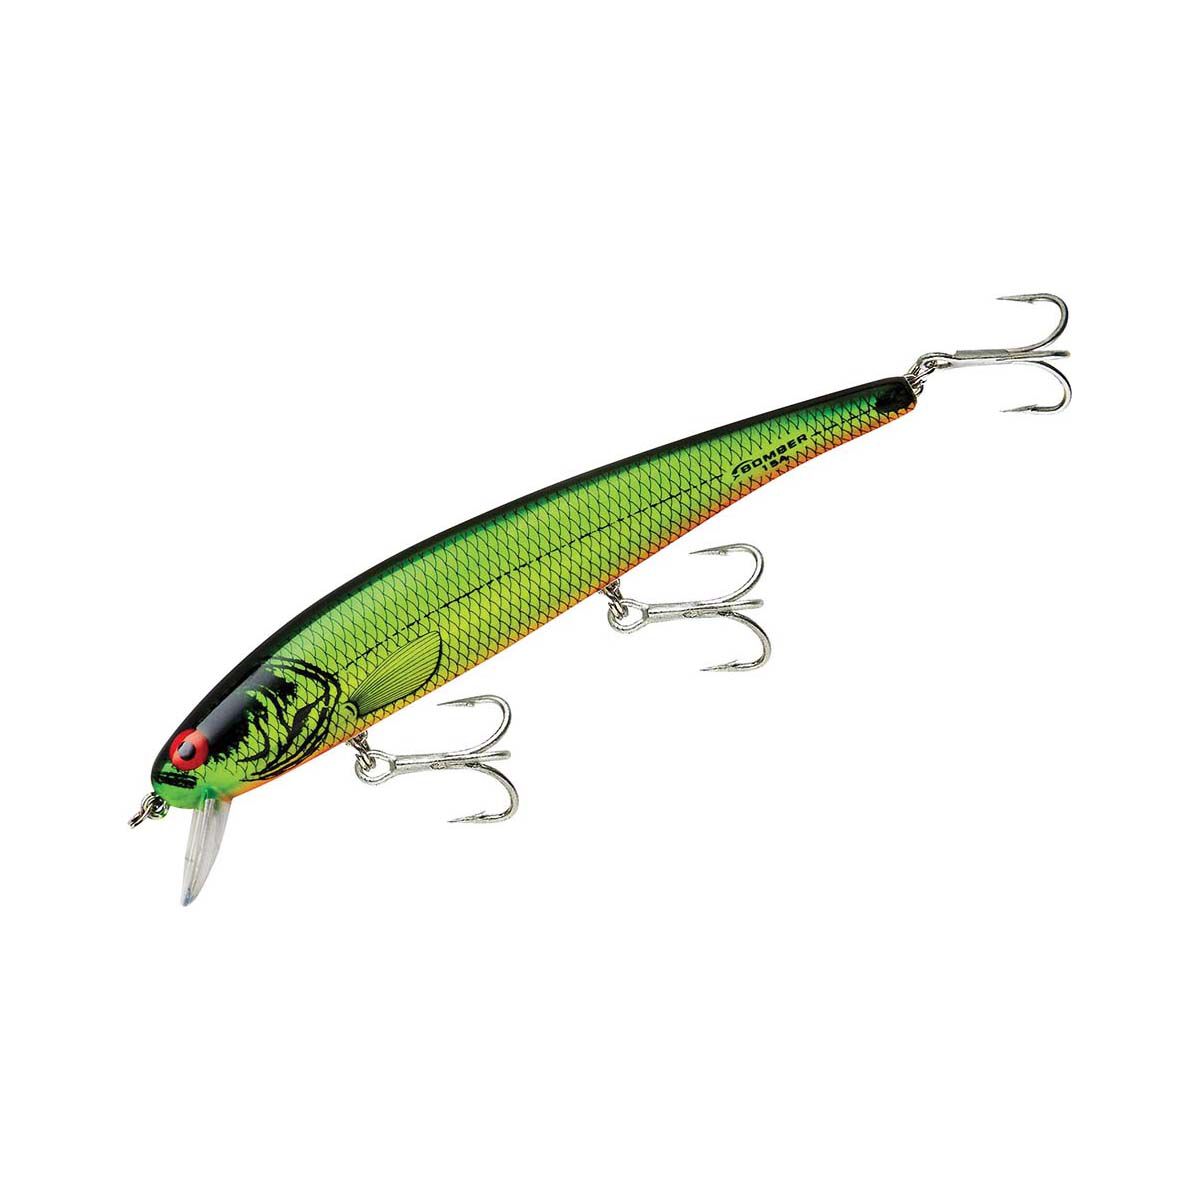 Inline Hook Replacements For All Hard Baits - Flats Class